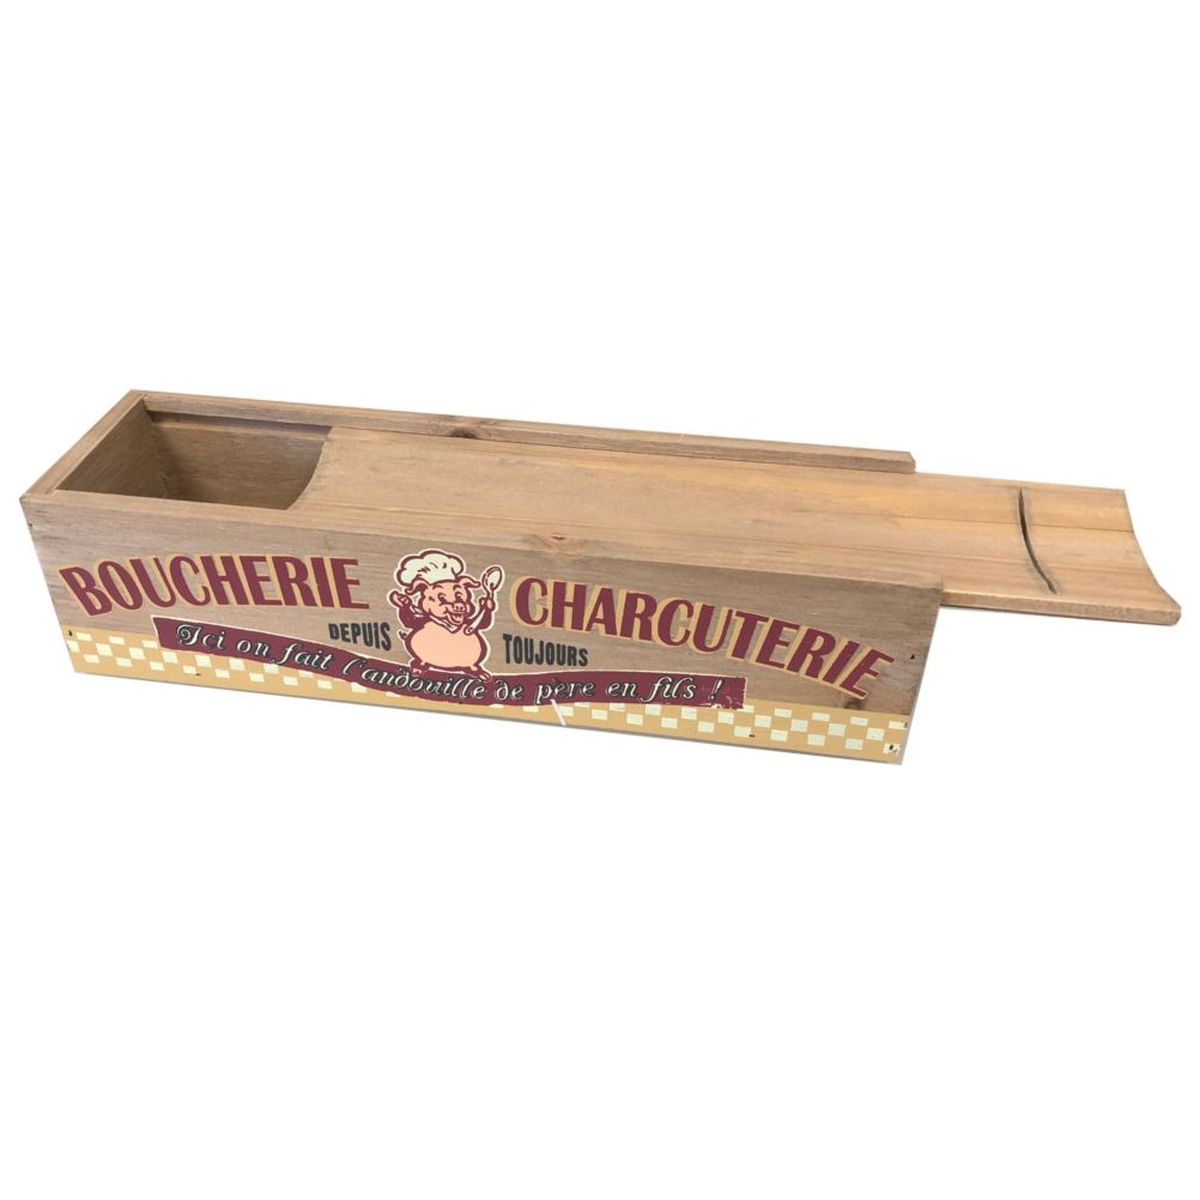 Sausage box with knife - Boucherie Charcuterie